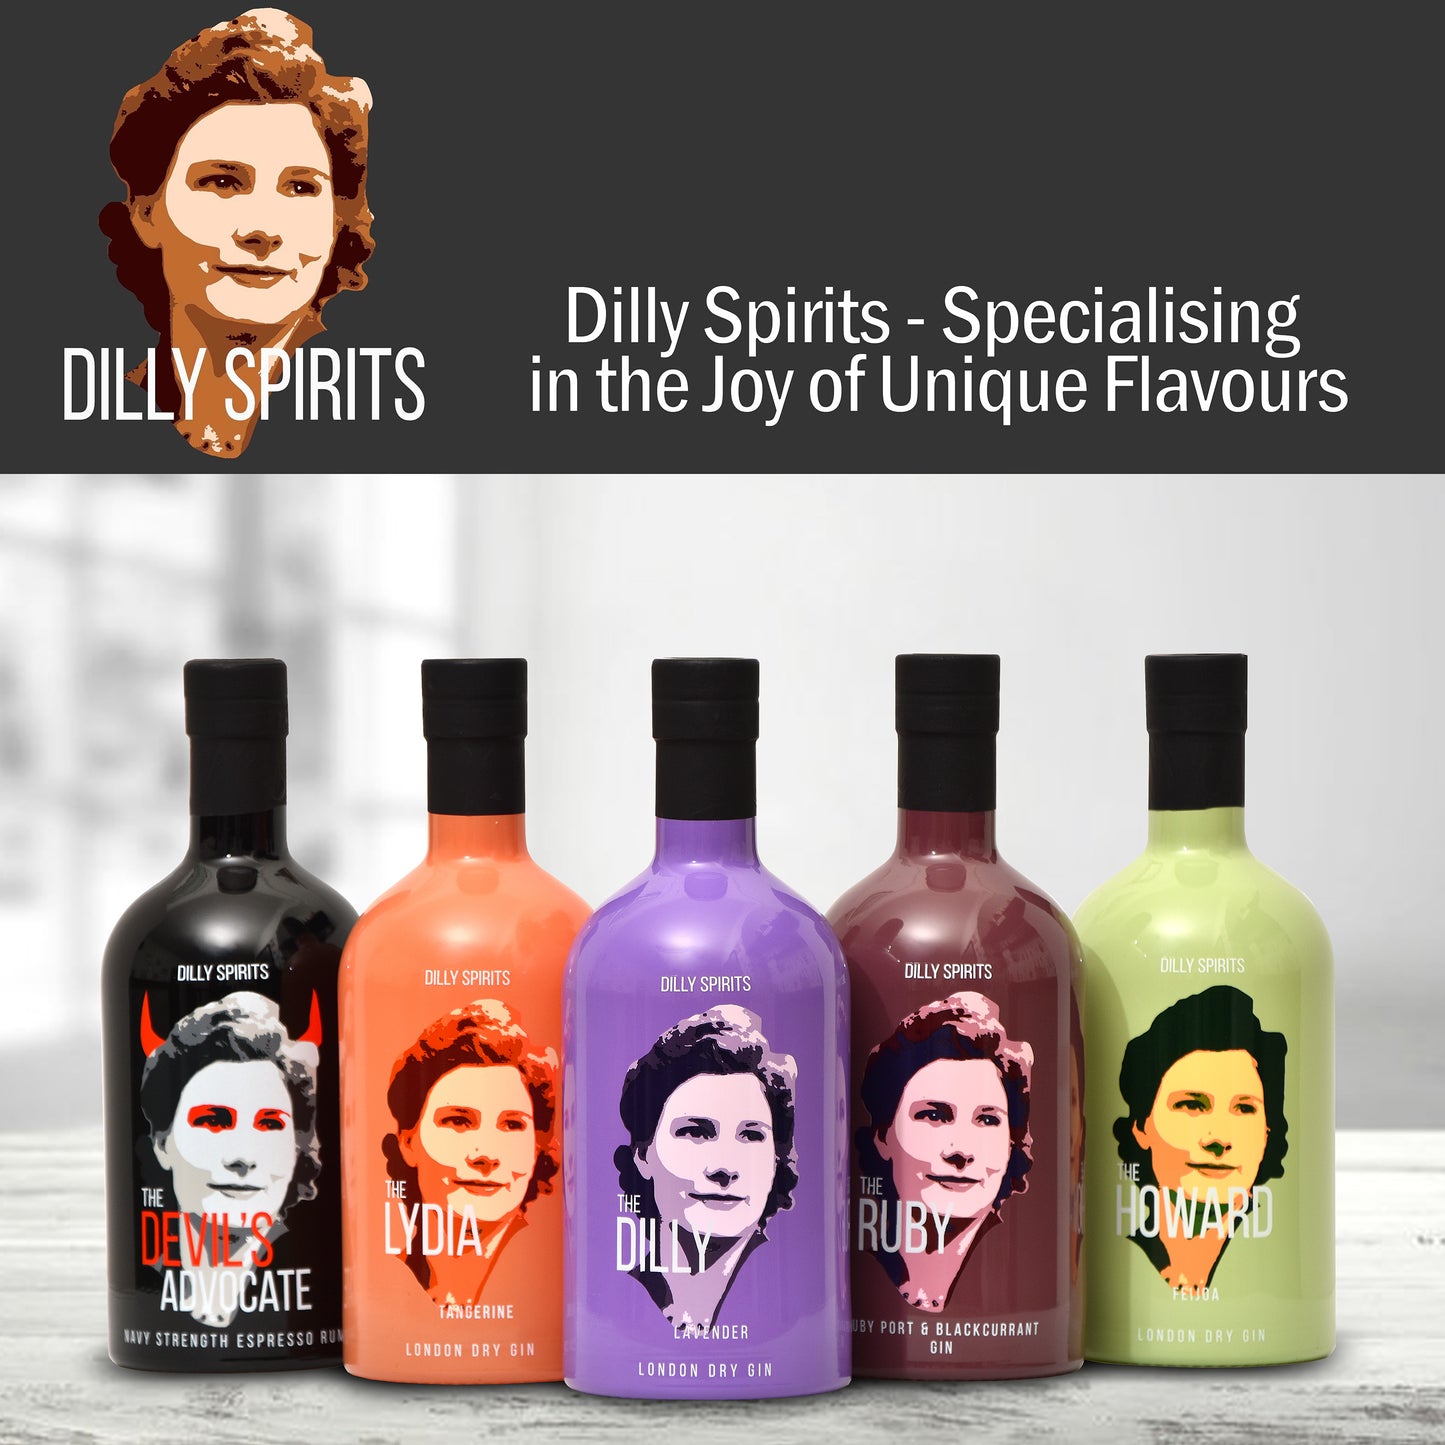 The Dilly Lavender Gin